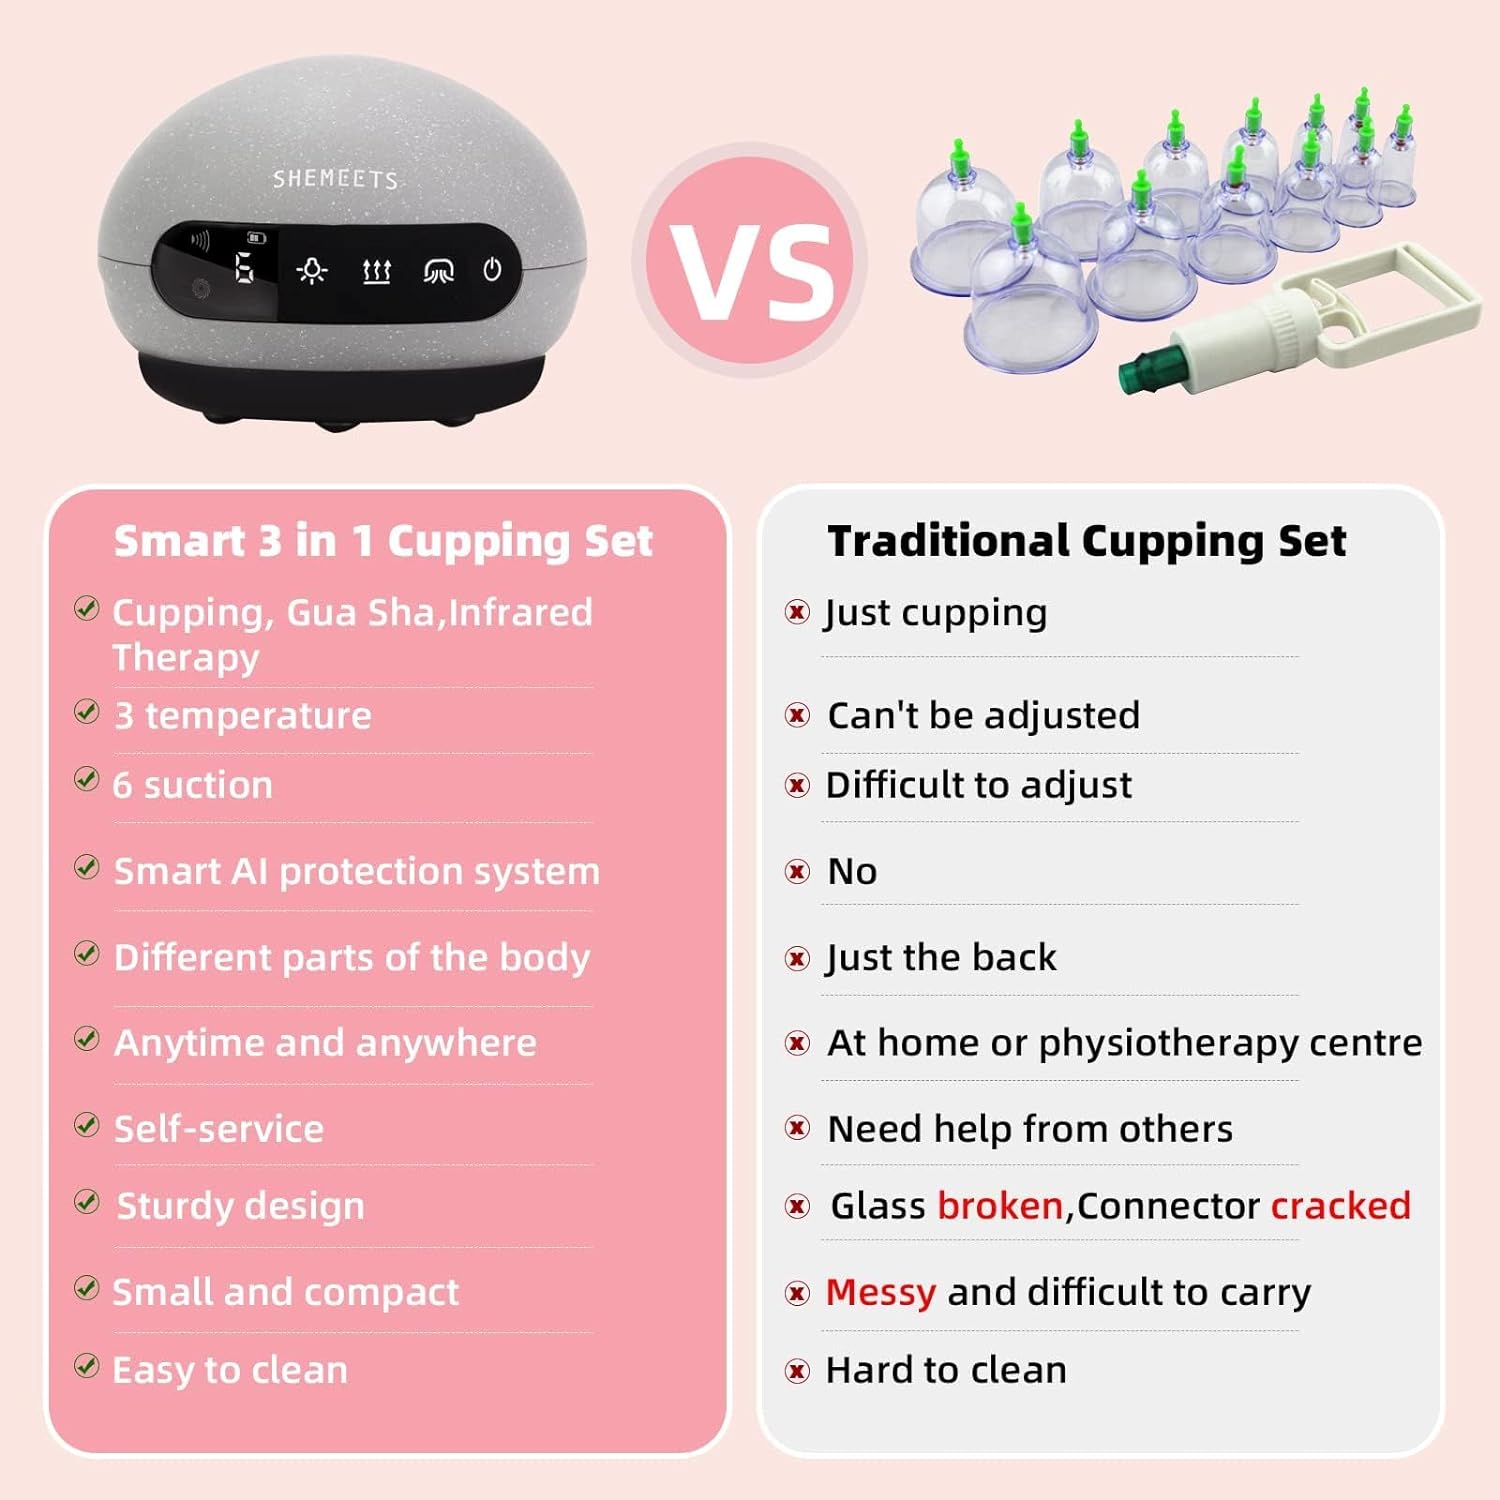 Shemeets 3 in 1 Cupping Set, Electric Cupping Therapy Set Gua Sha Massage Tool Cellulite Massager,Back Massager with Infrared Heat, 2200mAh Rechargeable Vacuum Therapy Machine, Handheld Scraping Tools